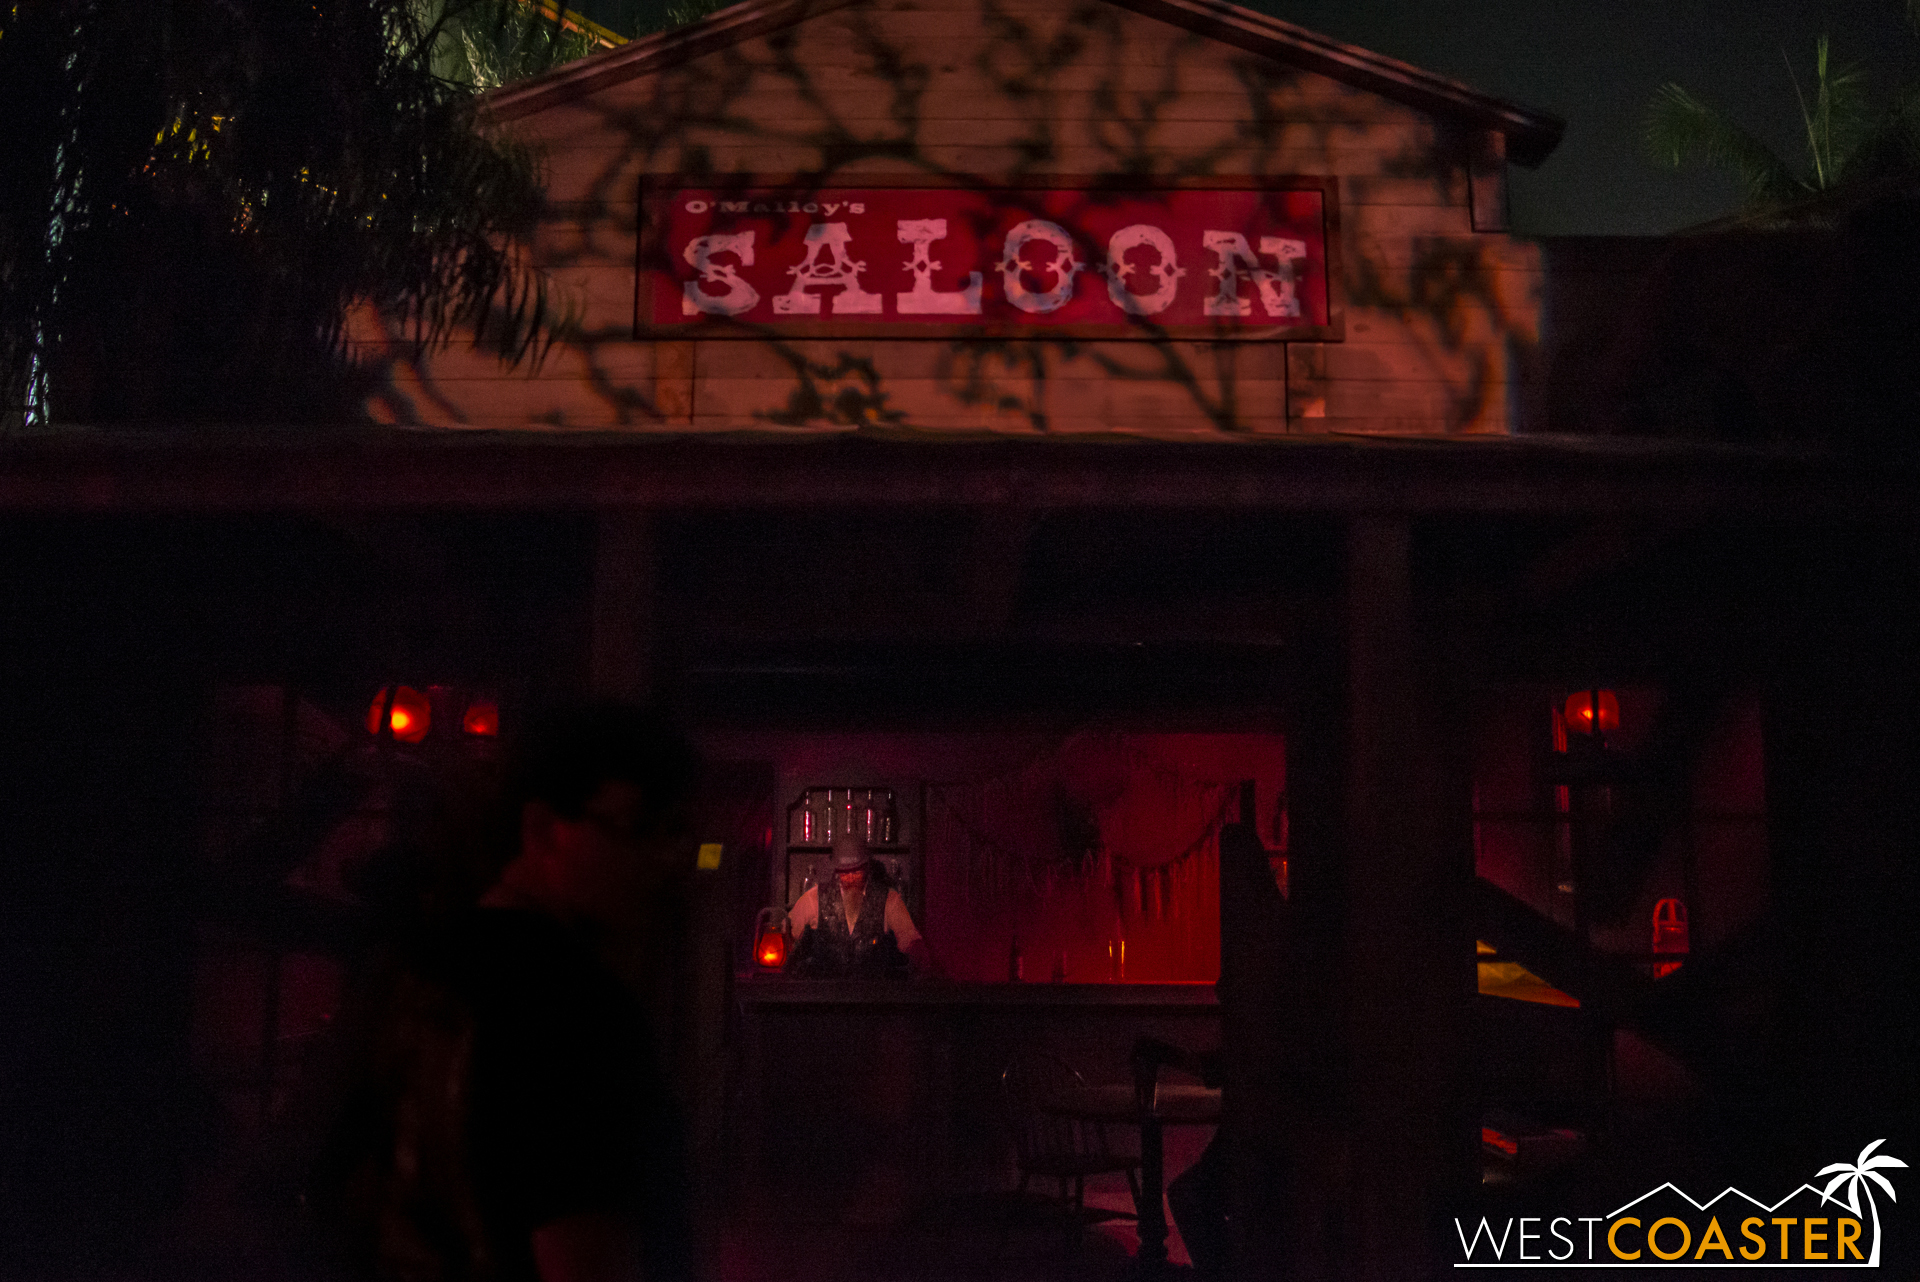  The lairs are dark and hard to photograph, so we skip over to the saloon. 